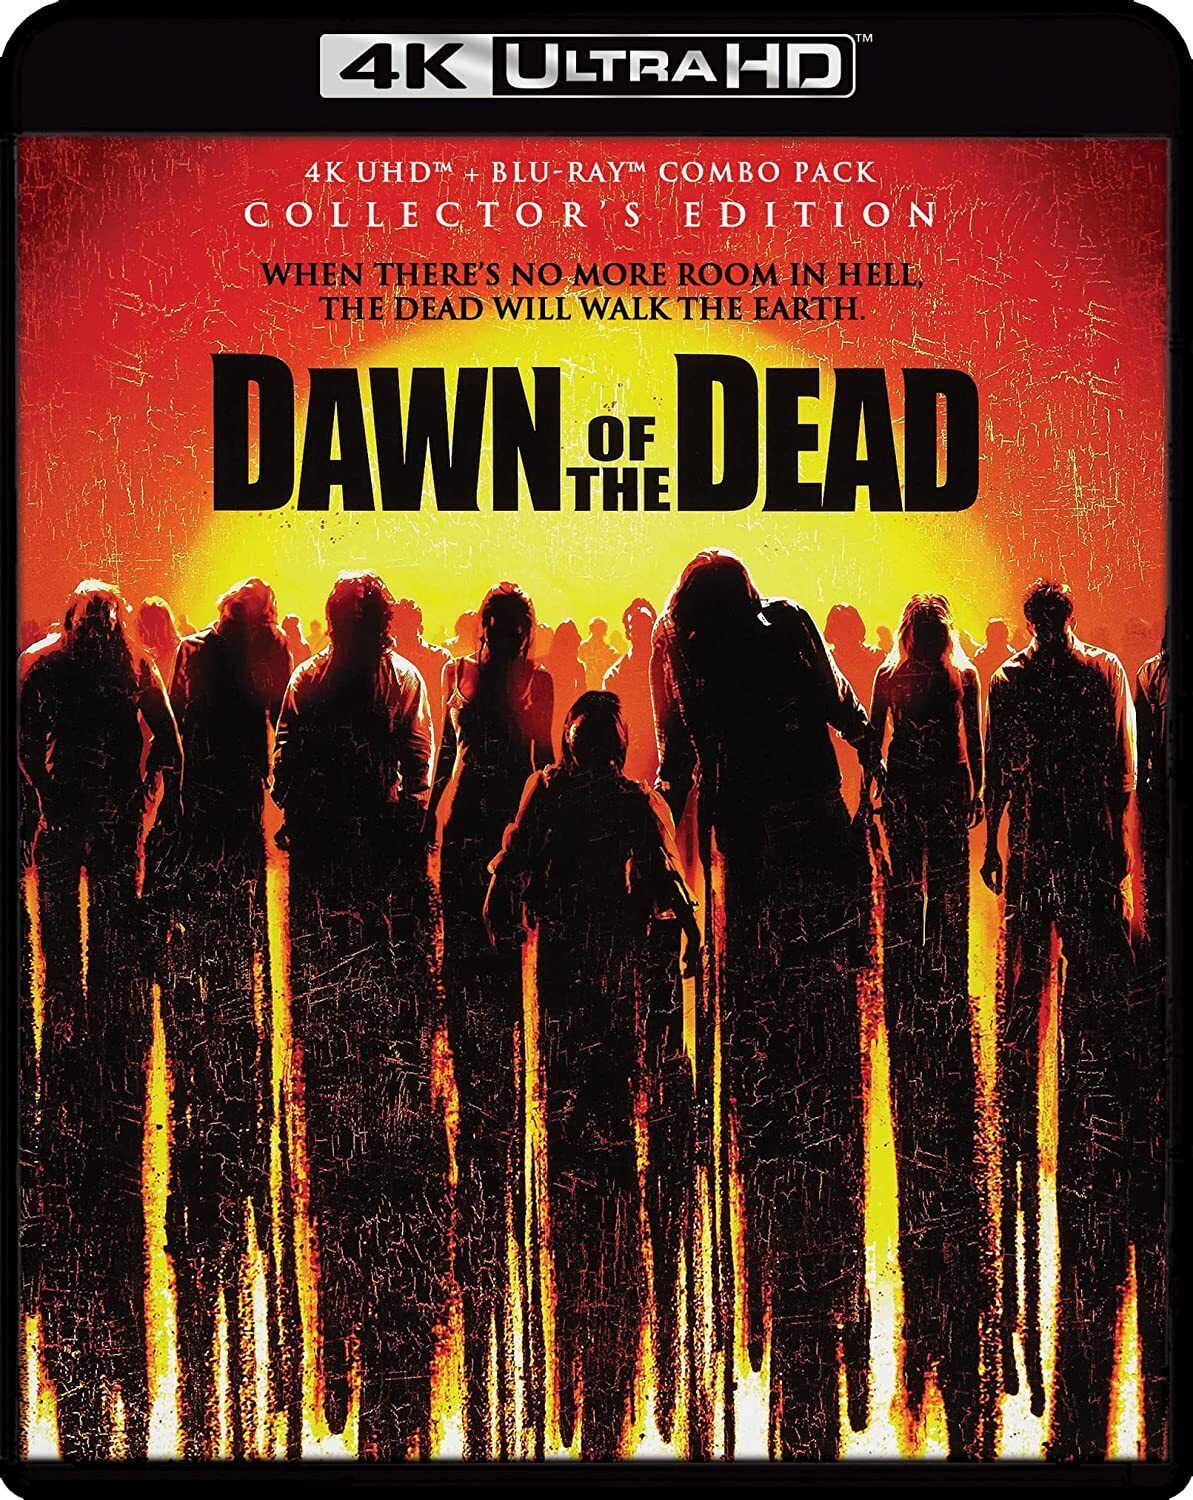 Shadows loom on the cover of Shout! Factory's 4K edition of Zack Snyder's DAWN OF THE DEAD.